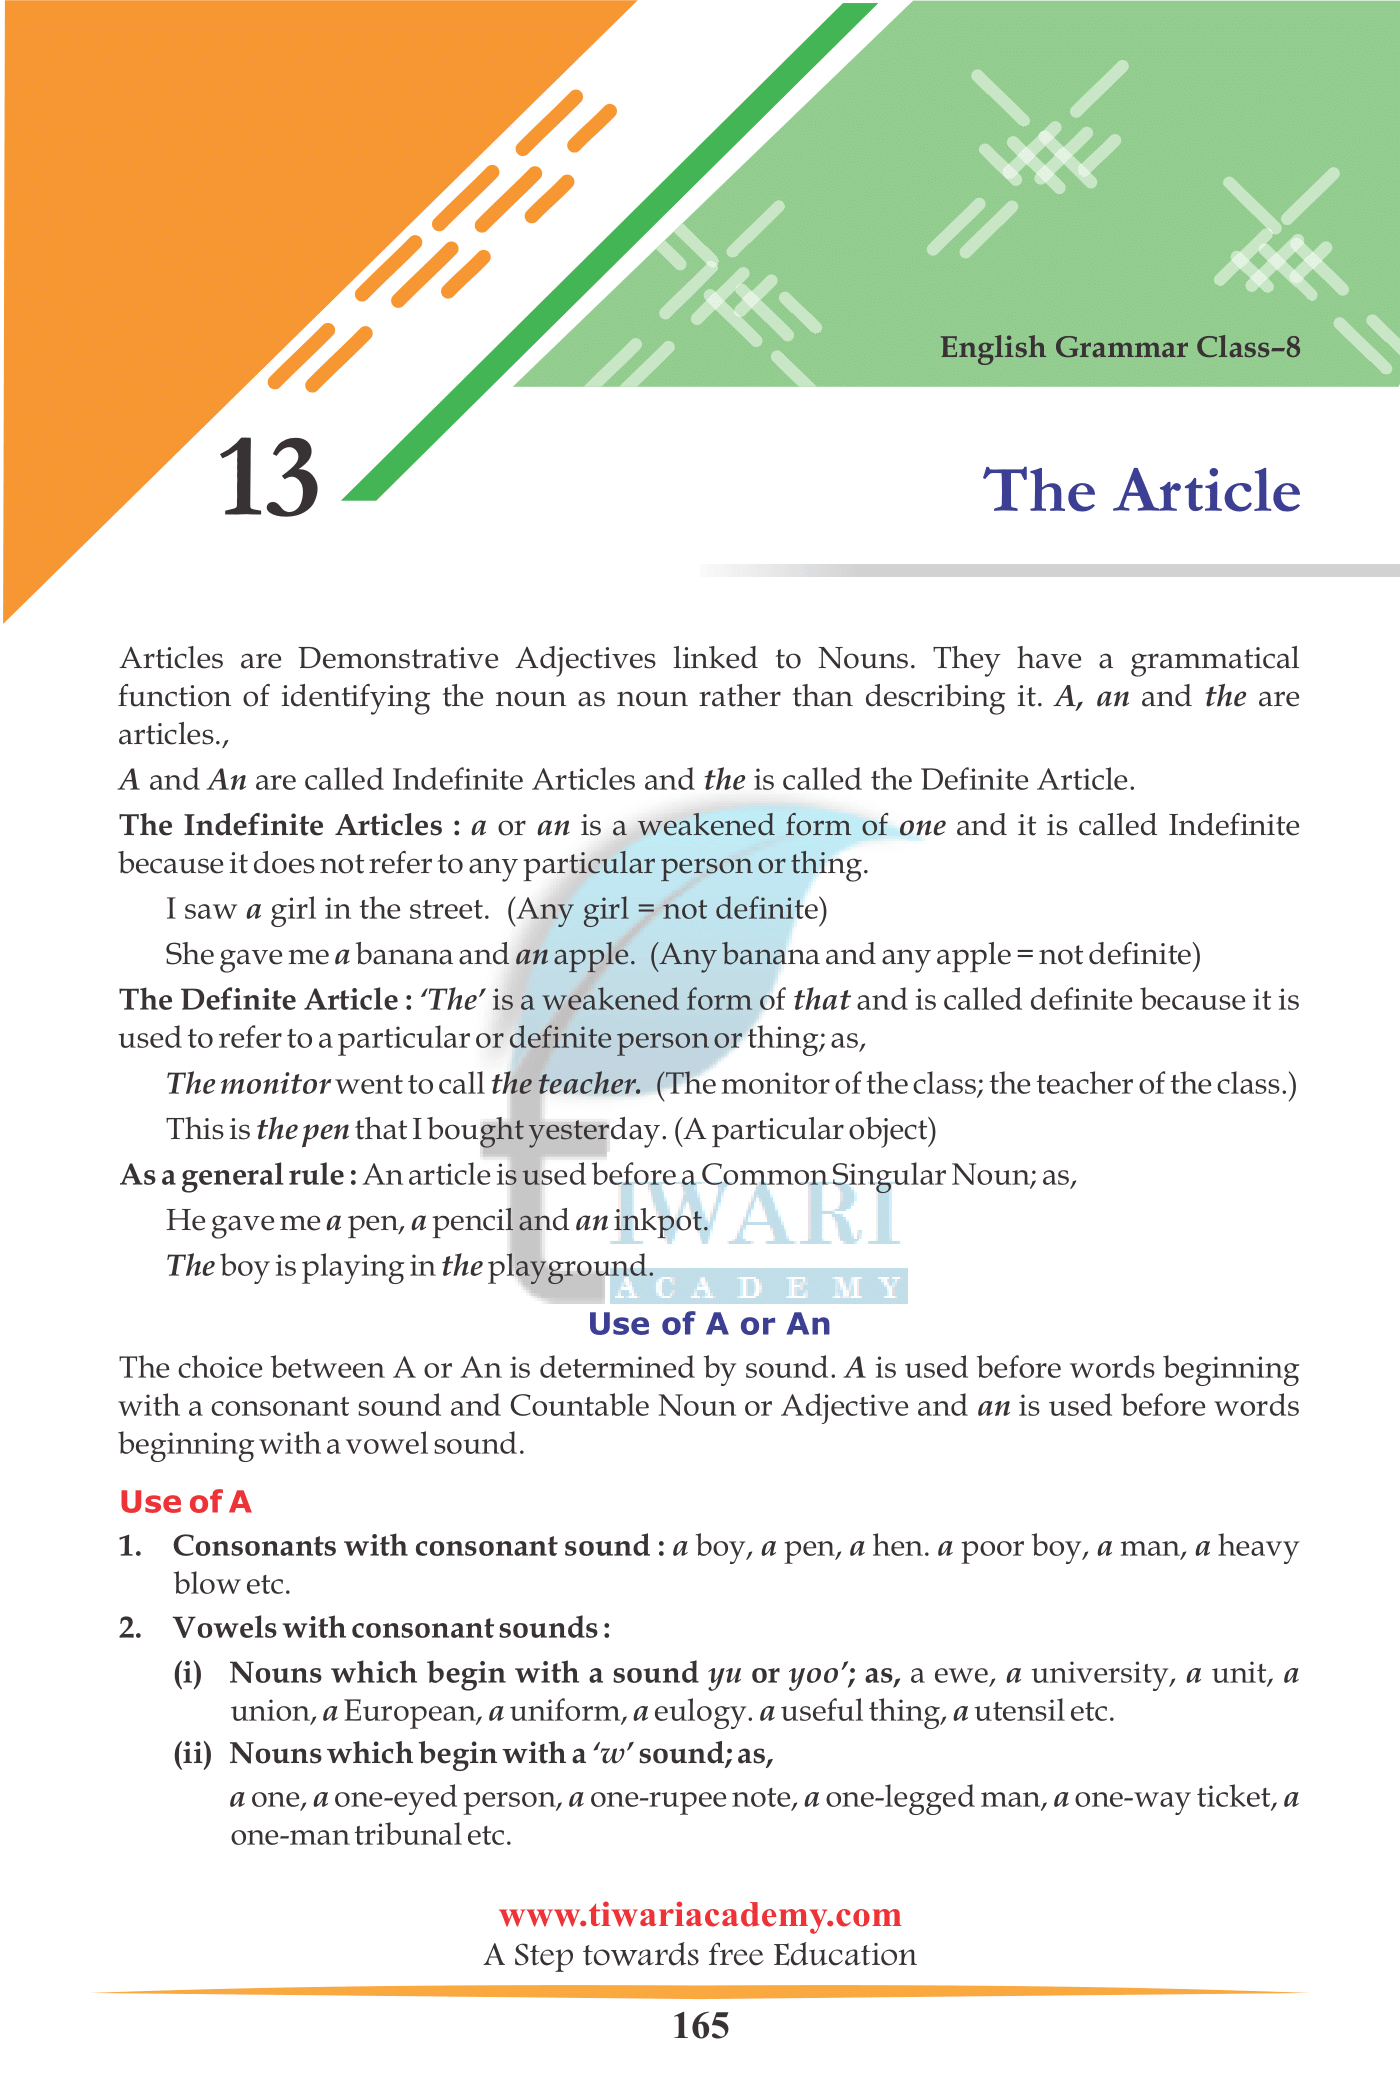 Class 8 English Grammar Chapter 13 The Article for CBSE 2022-2023